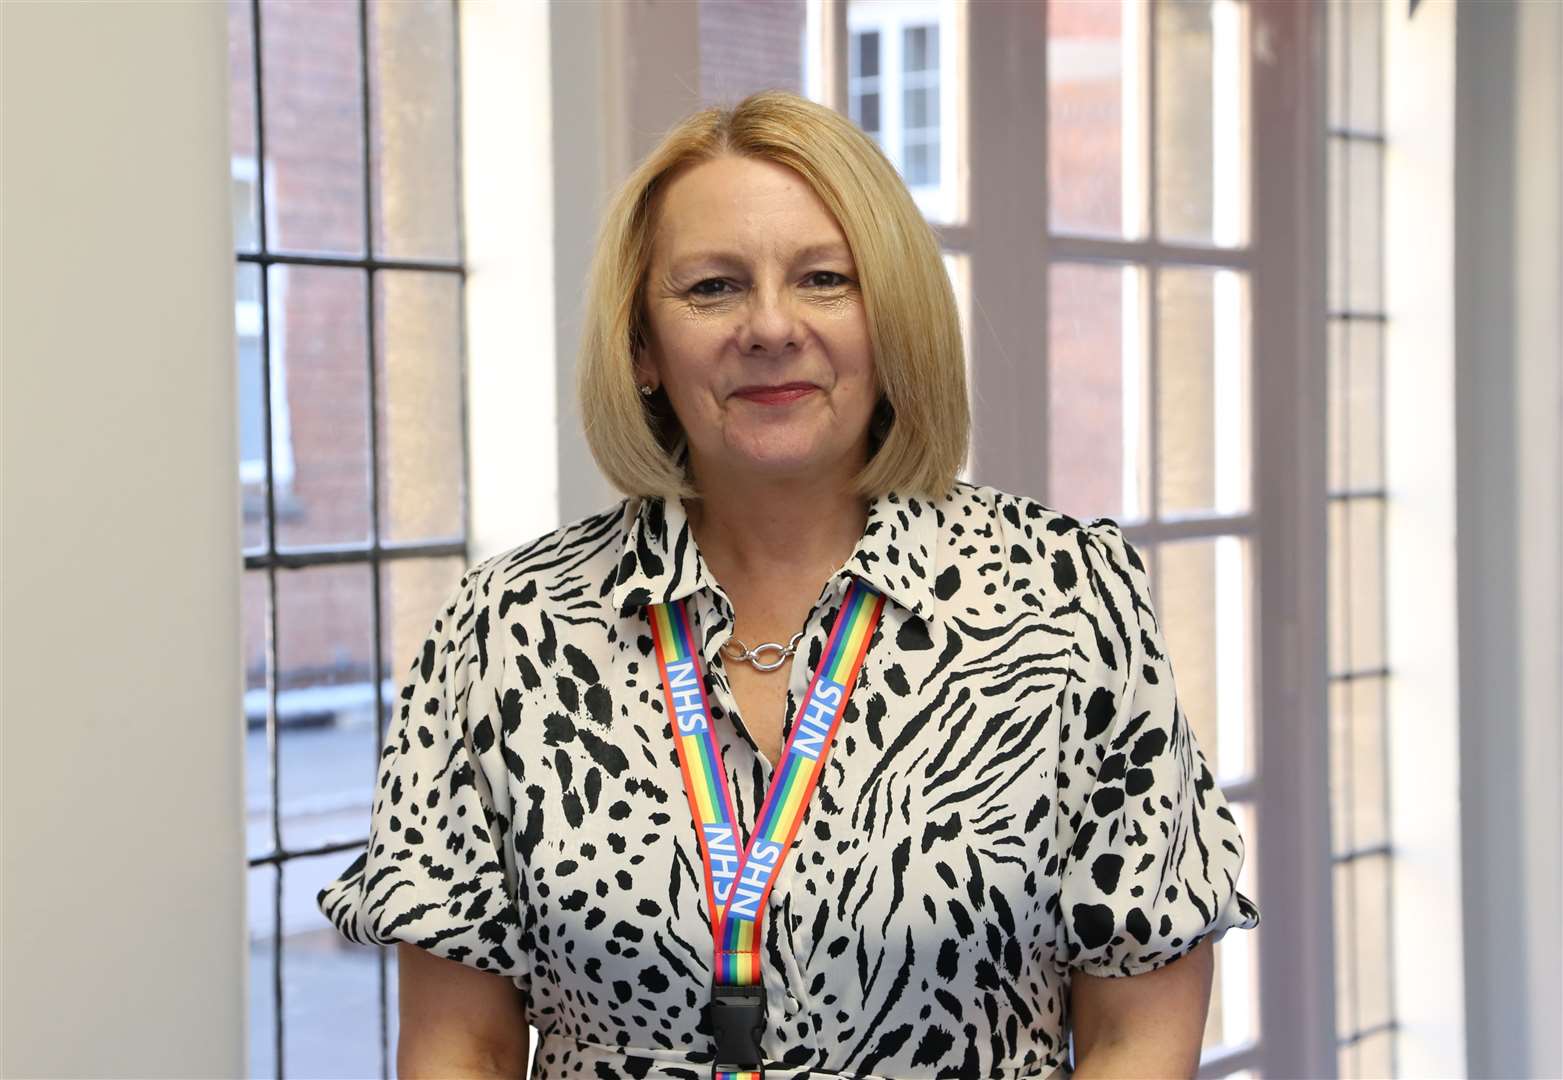 Jayne Black, the new chief executive of Medway NHS Foundation Trust